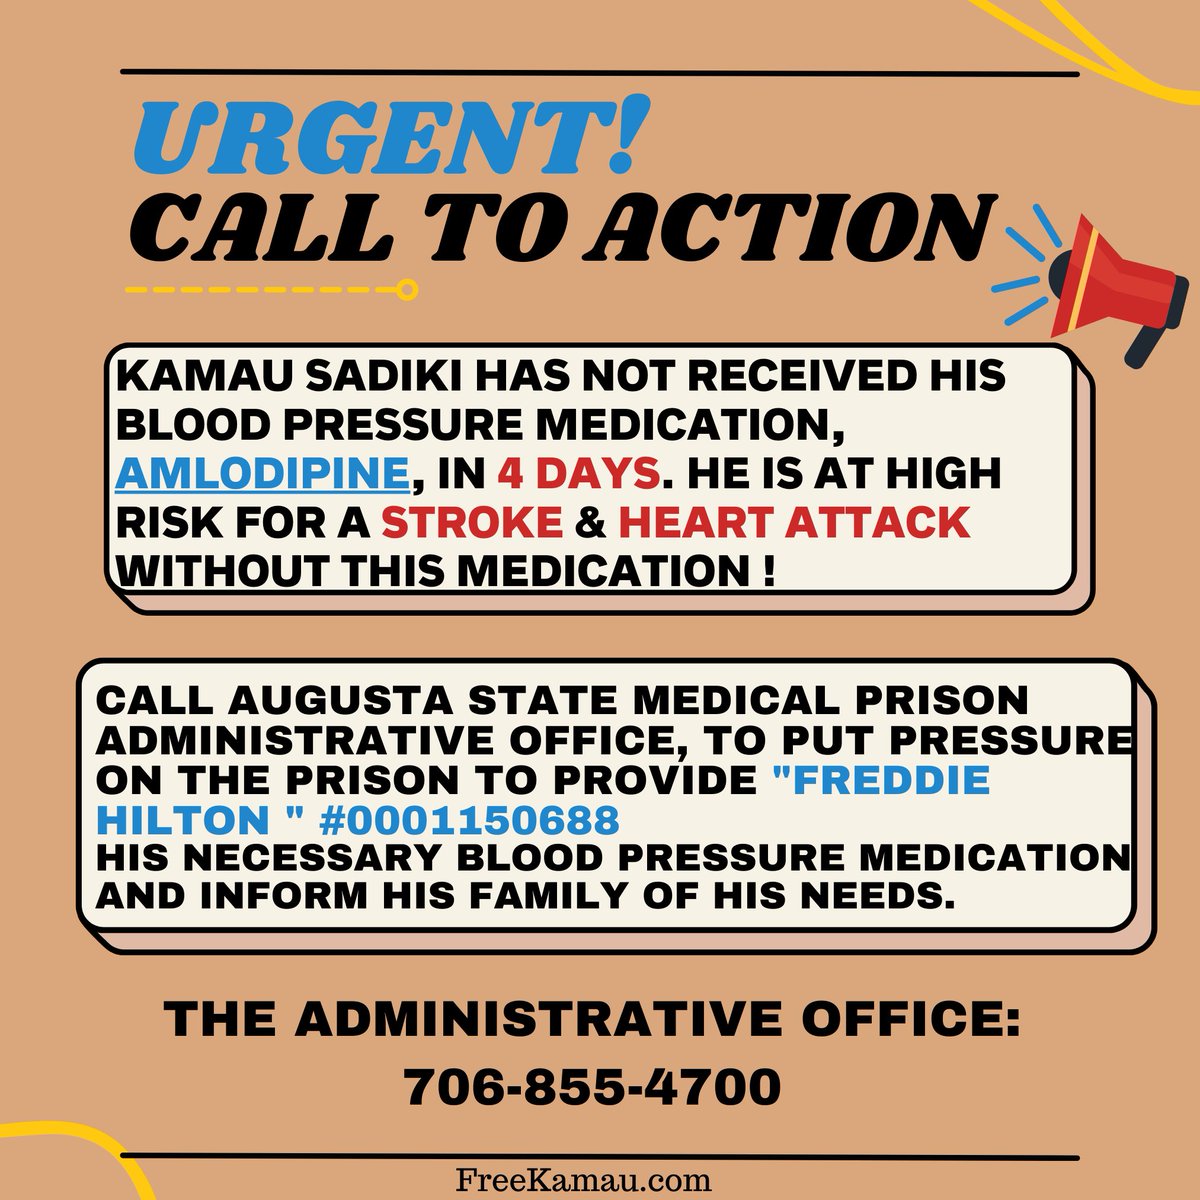 📣URGENT! 
#KamauSadiki, is facing a medical crisis due to medical neglect. He has not received his Blood Pressure Medication, Amlodipine in 4 days‼️ He is at high risk for a heart attack & stroke without this medicine! His family is concerned for his health!#FreeKamauSadiki